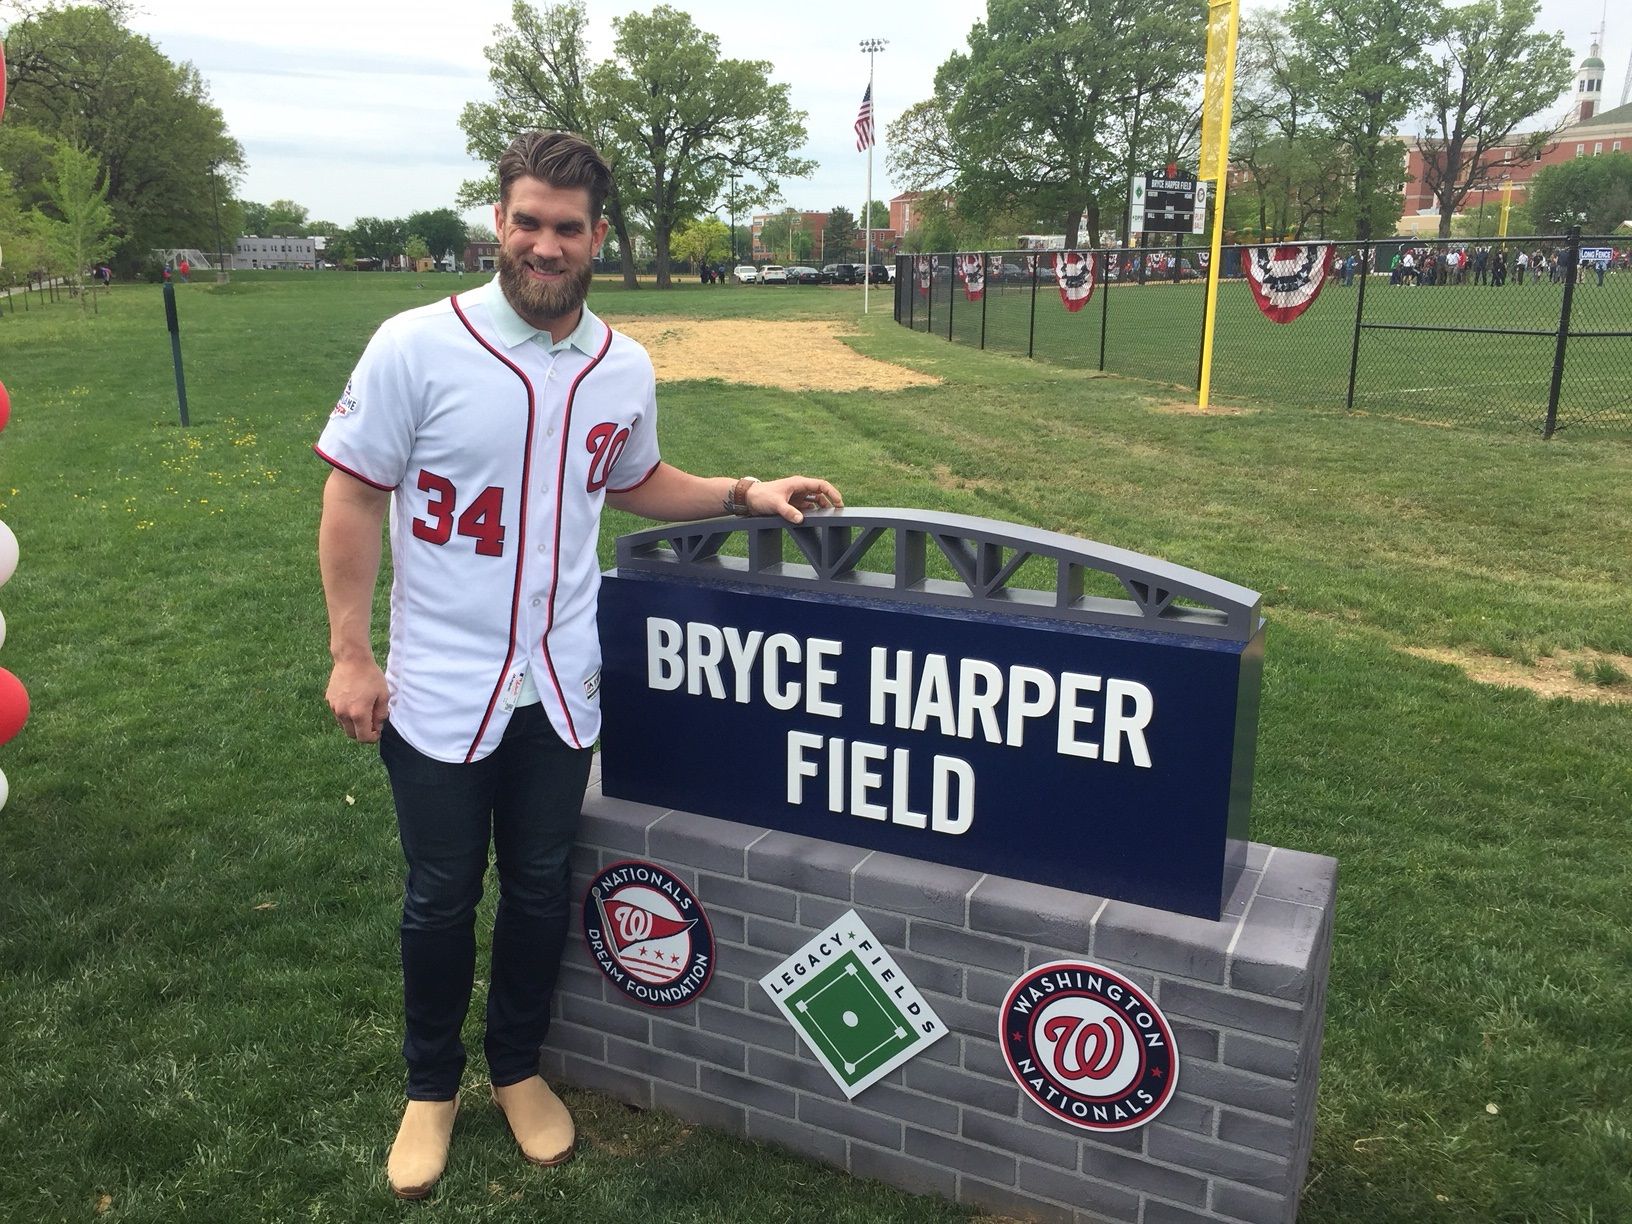 Hundreds of kids on Little League teams from around the District gathered at the Takoma Community Center in Northwest D.C. on Saturday to celebrate the newest Little League Baseball diamond in the region: Bryce Harper Field. (WTOP/John Domen)